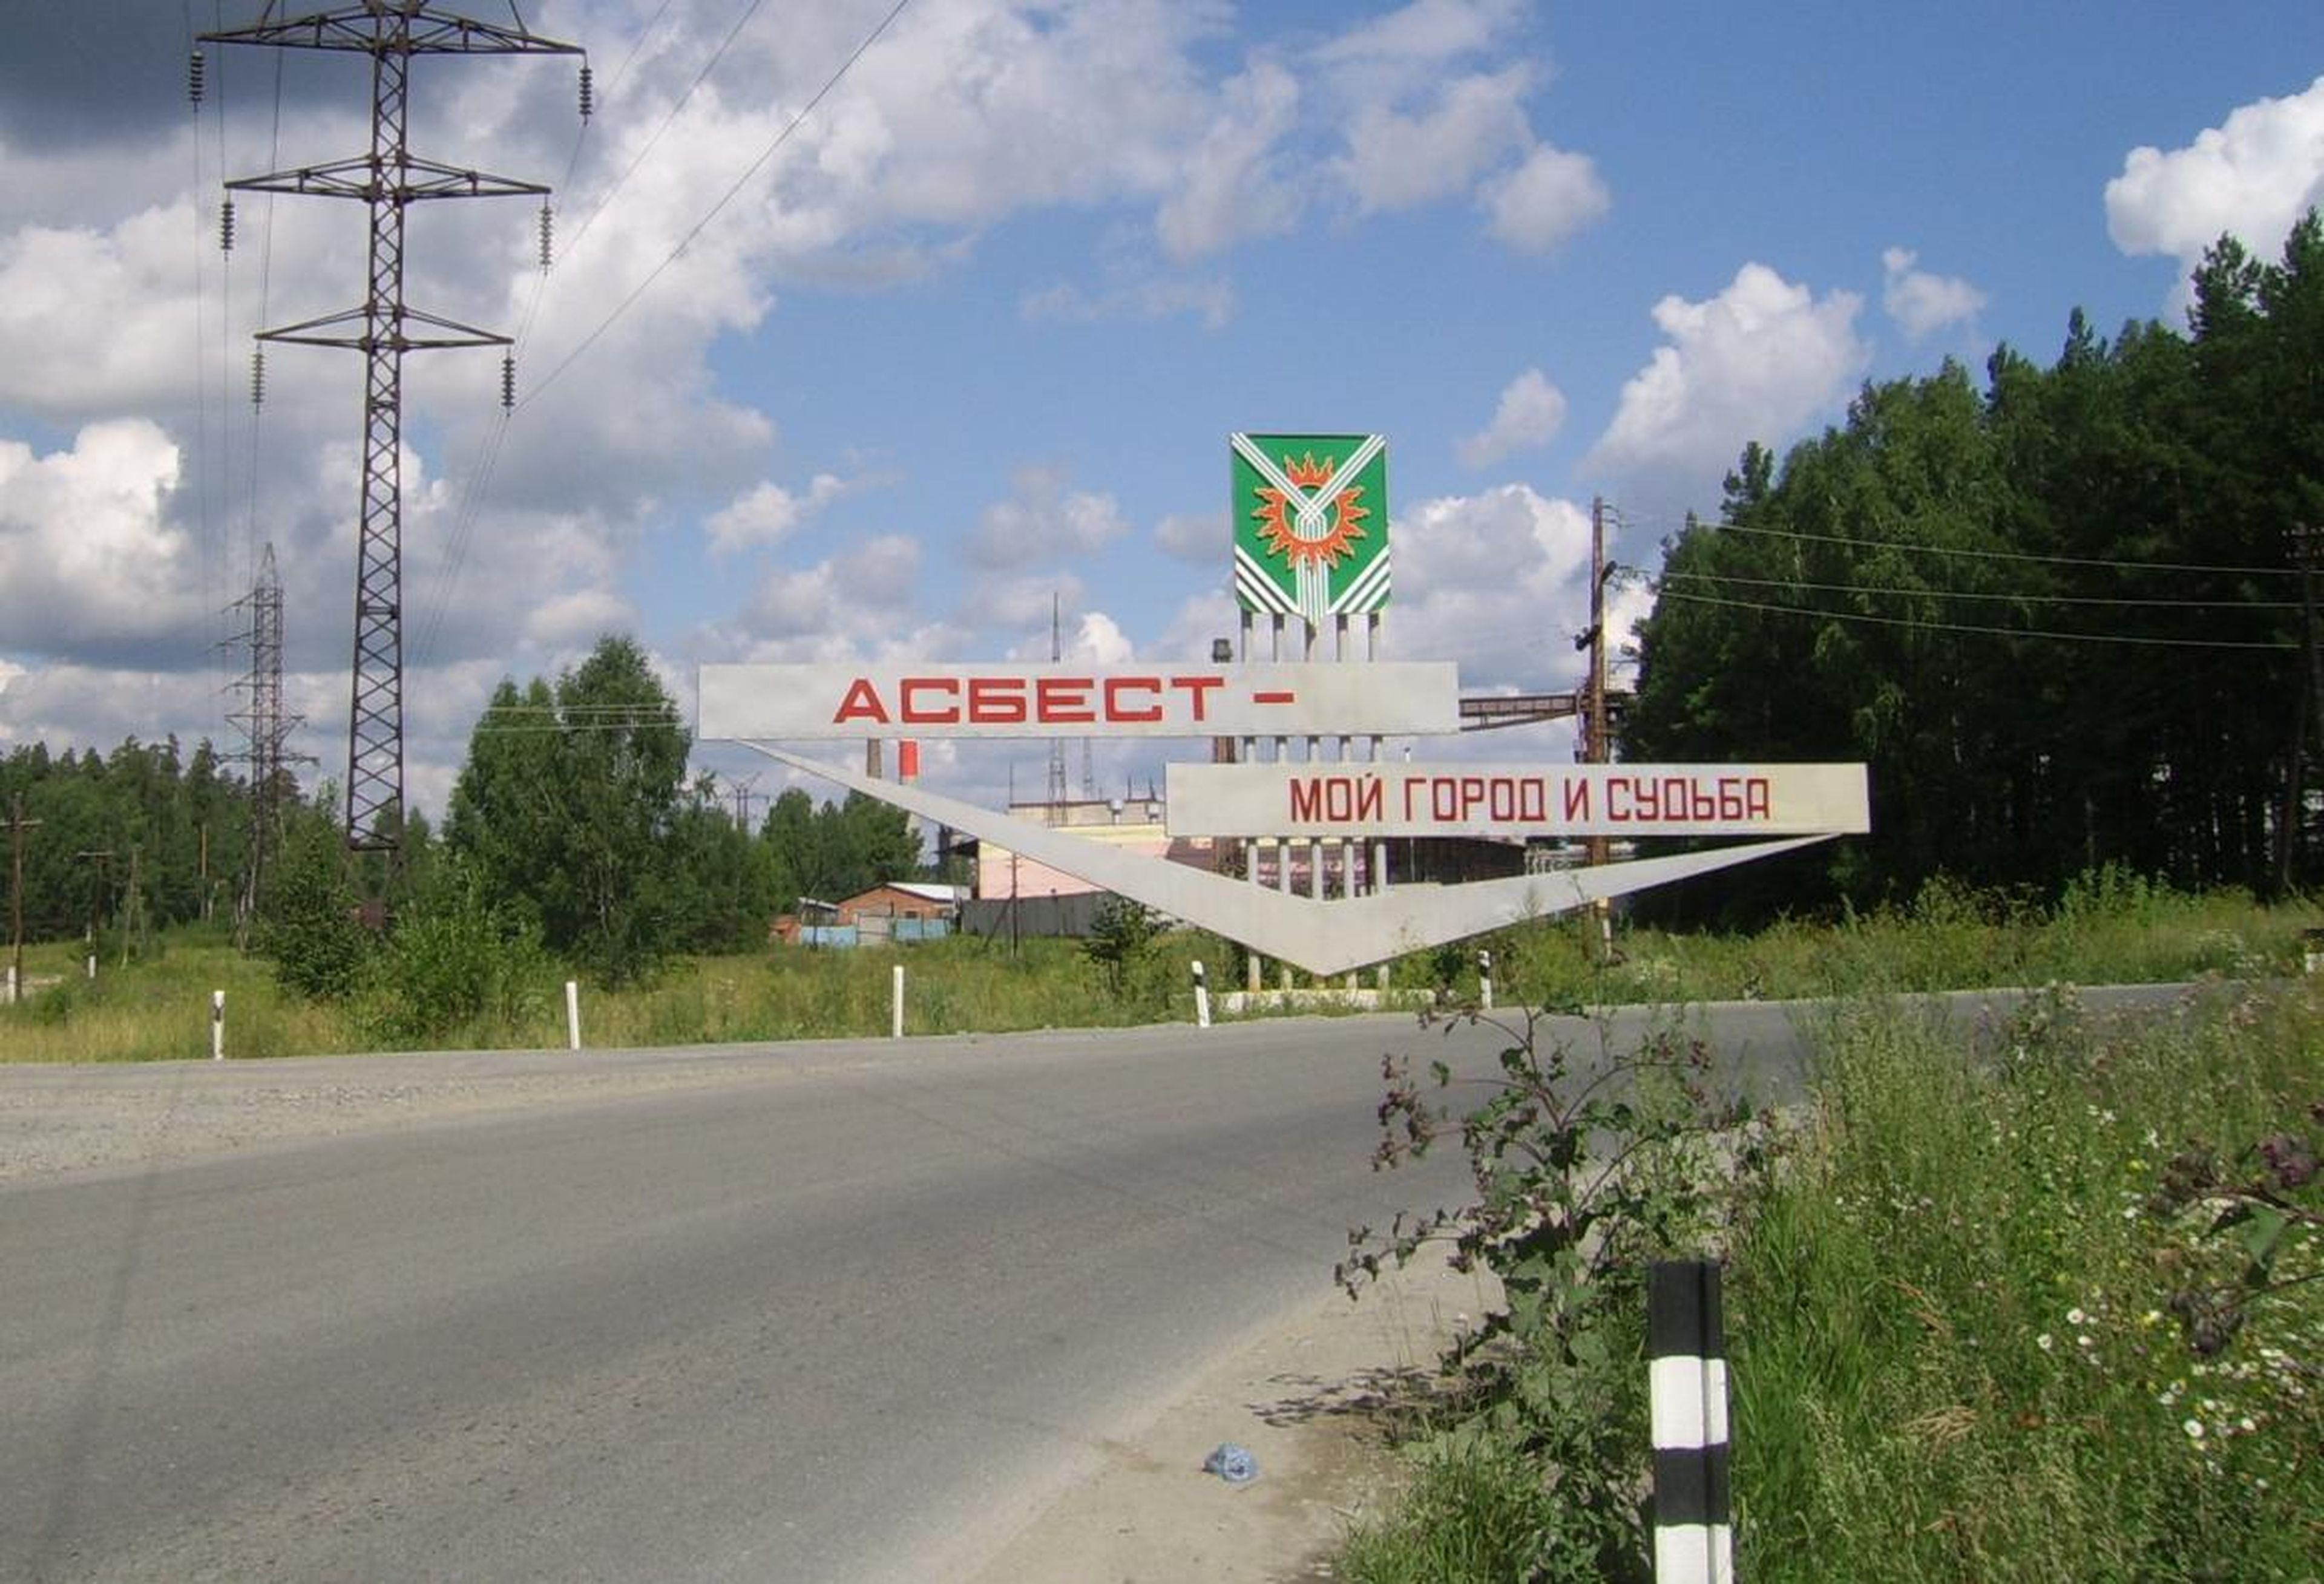 Asbest, Russia, produced 315,000 tons of asbestos last year